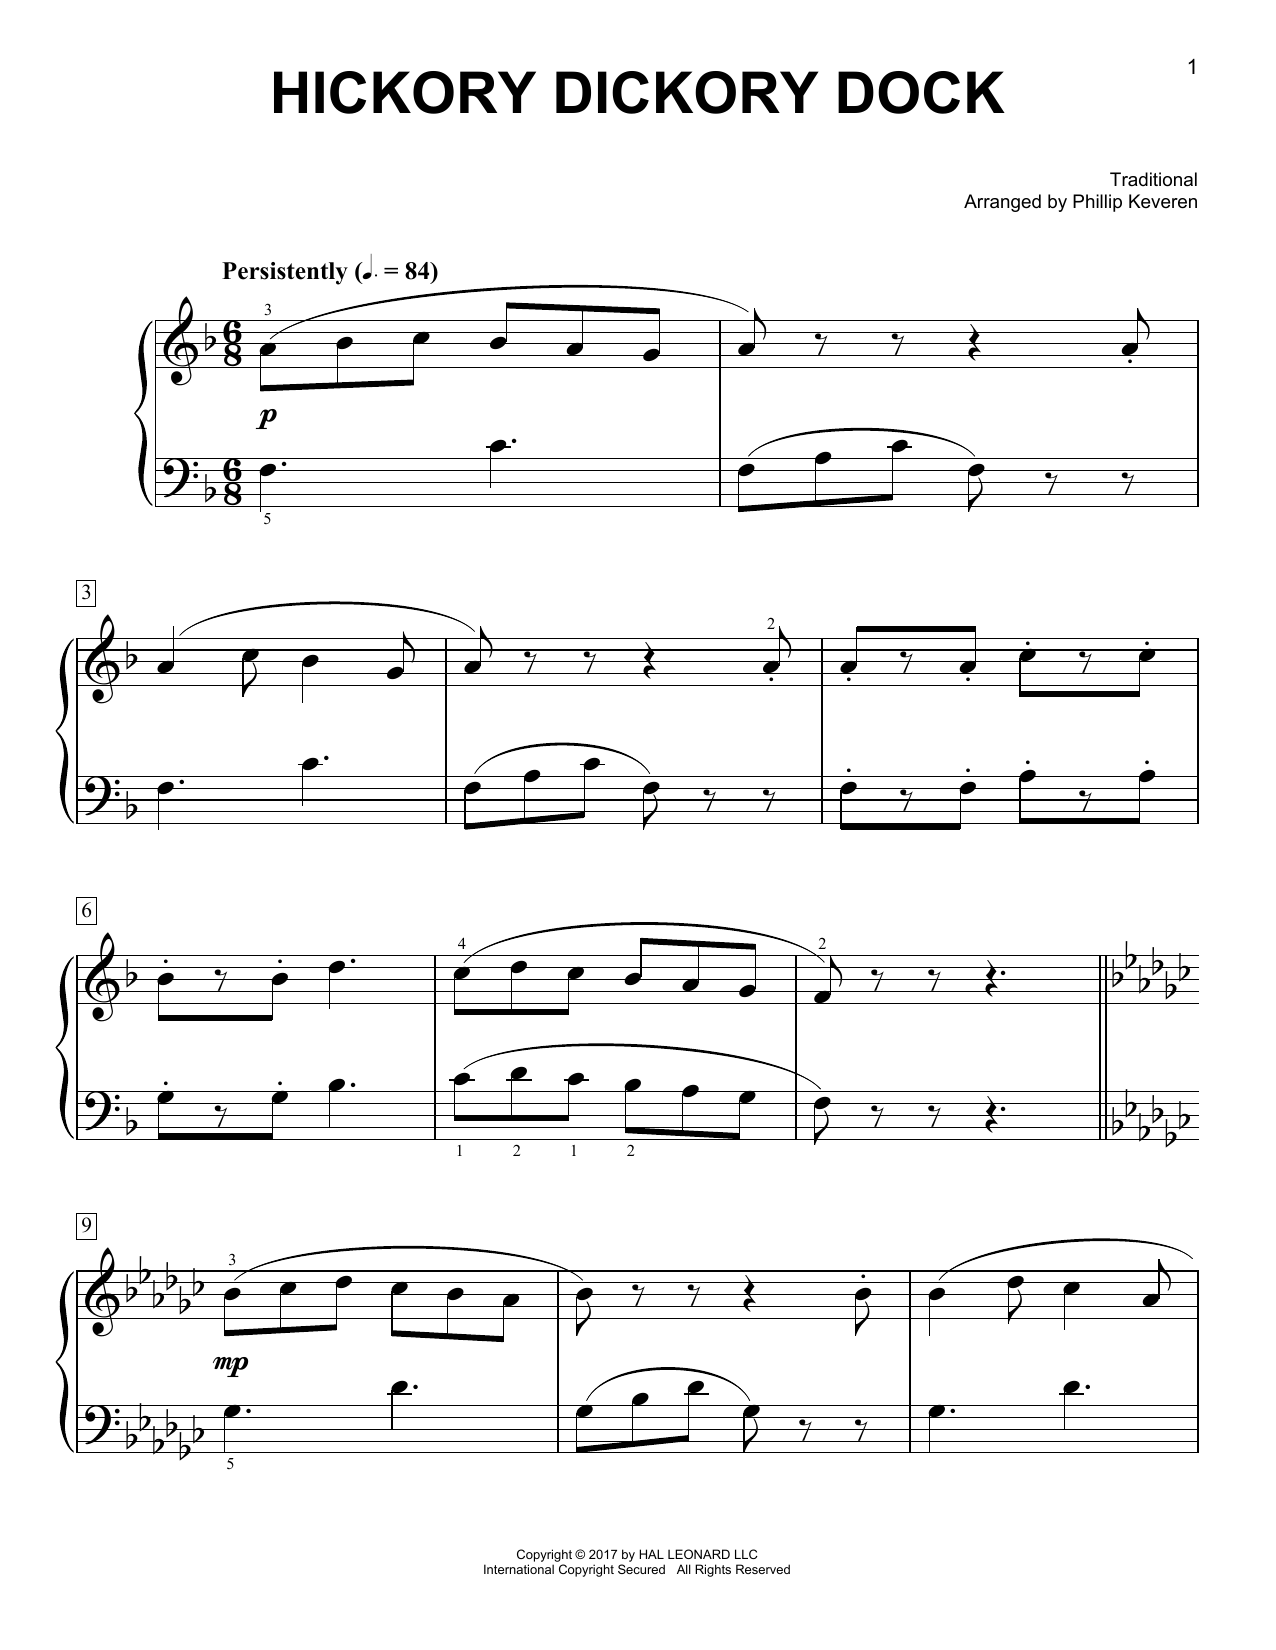 Download Traditional Hickory Dickory Dock [Classical version Sheet Music